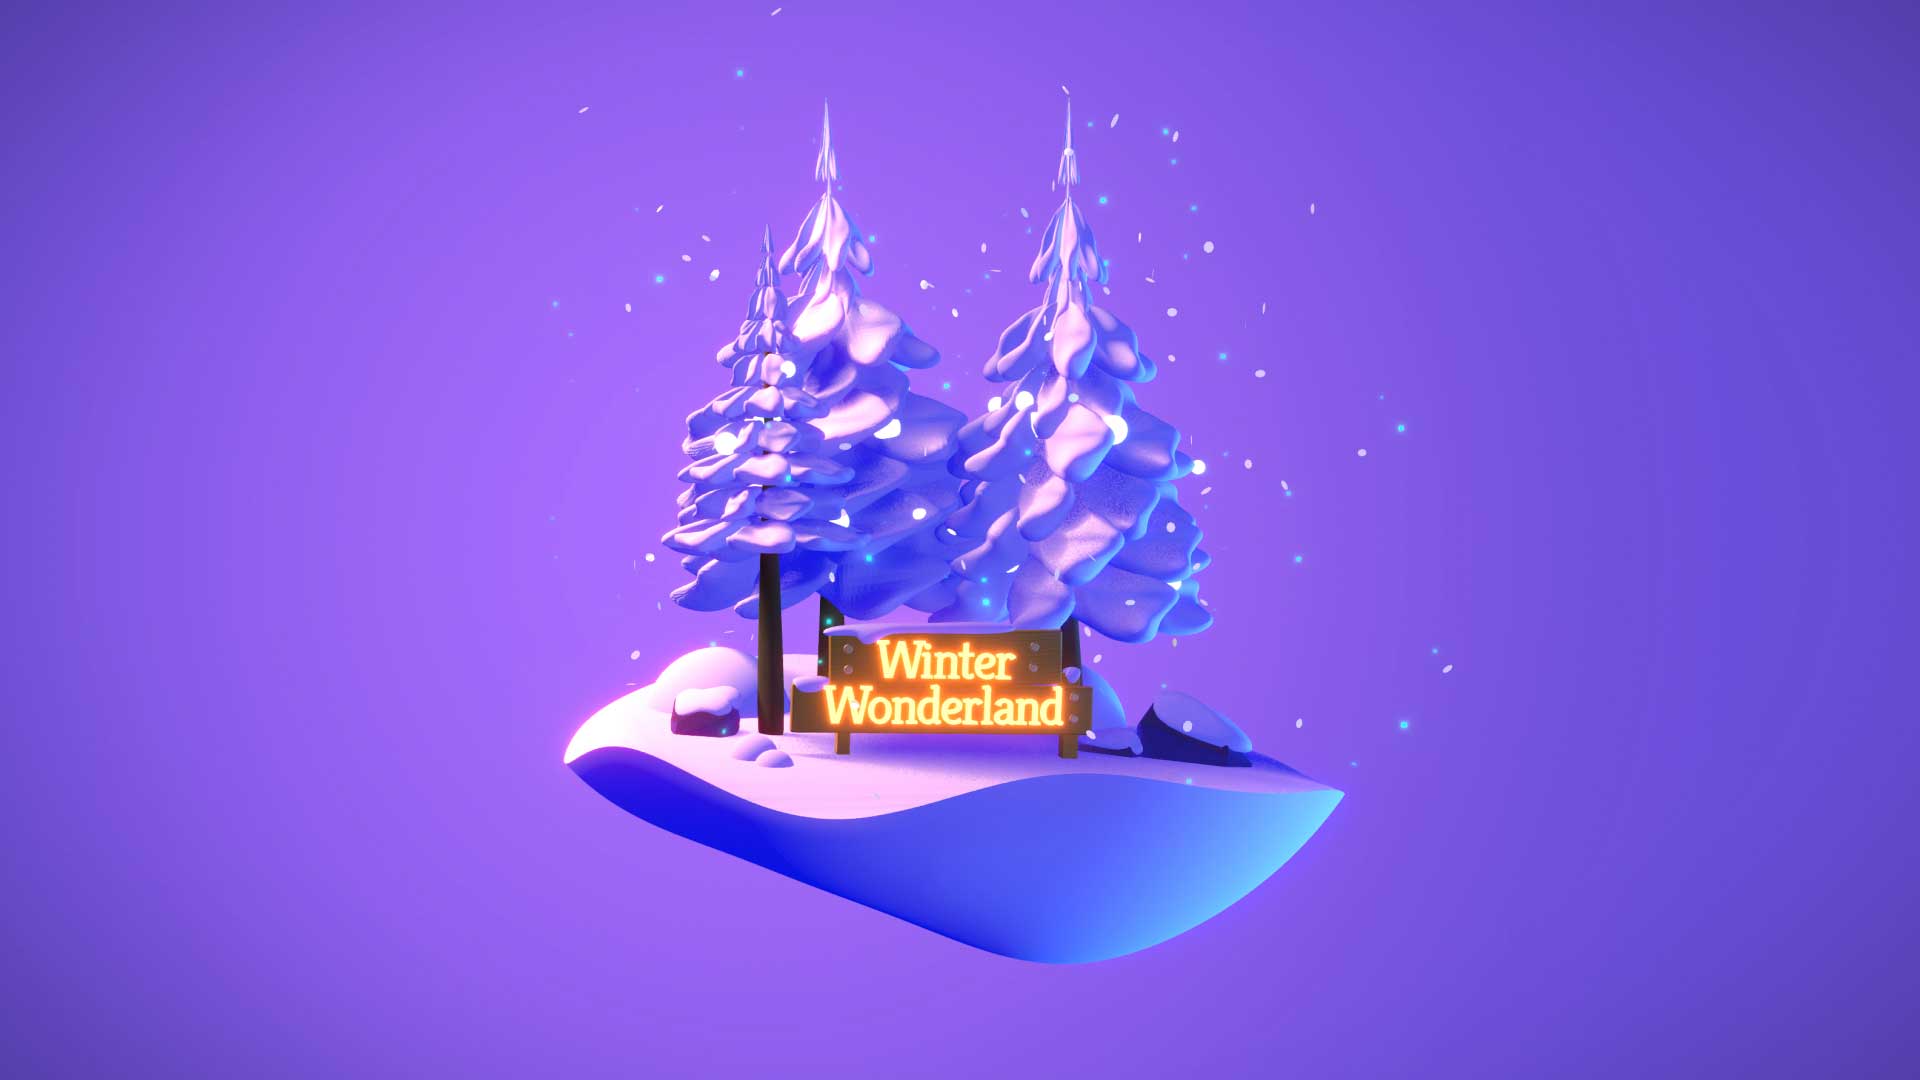 trees covered in snow and a winter wonderland sign in neon a 3d model made in vectary